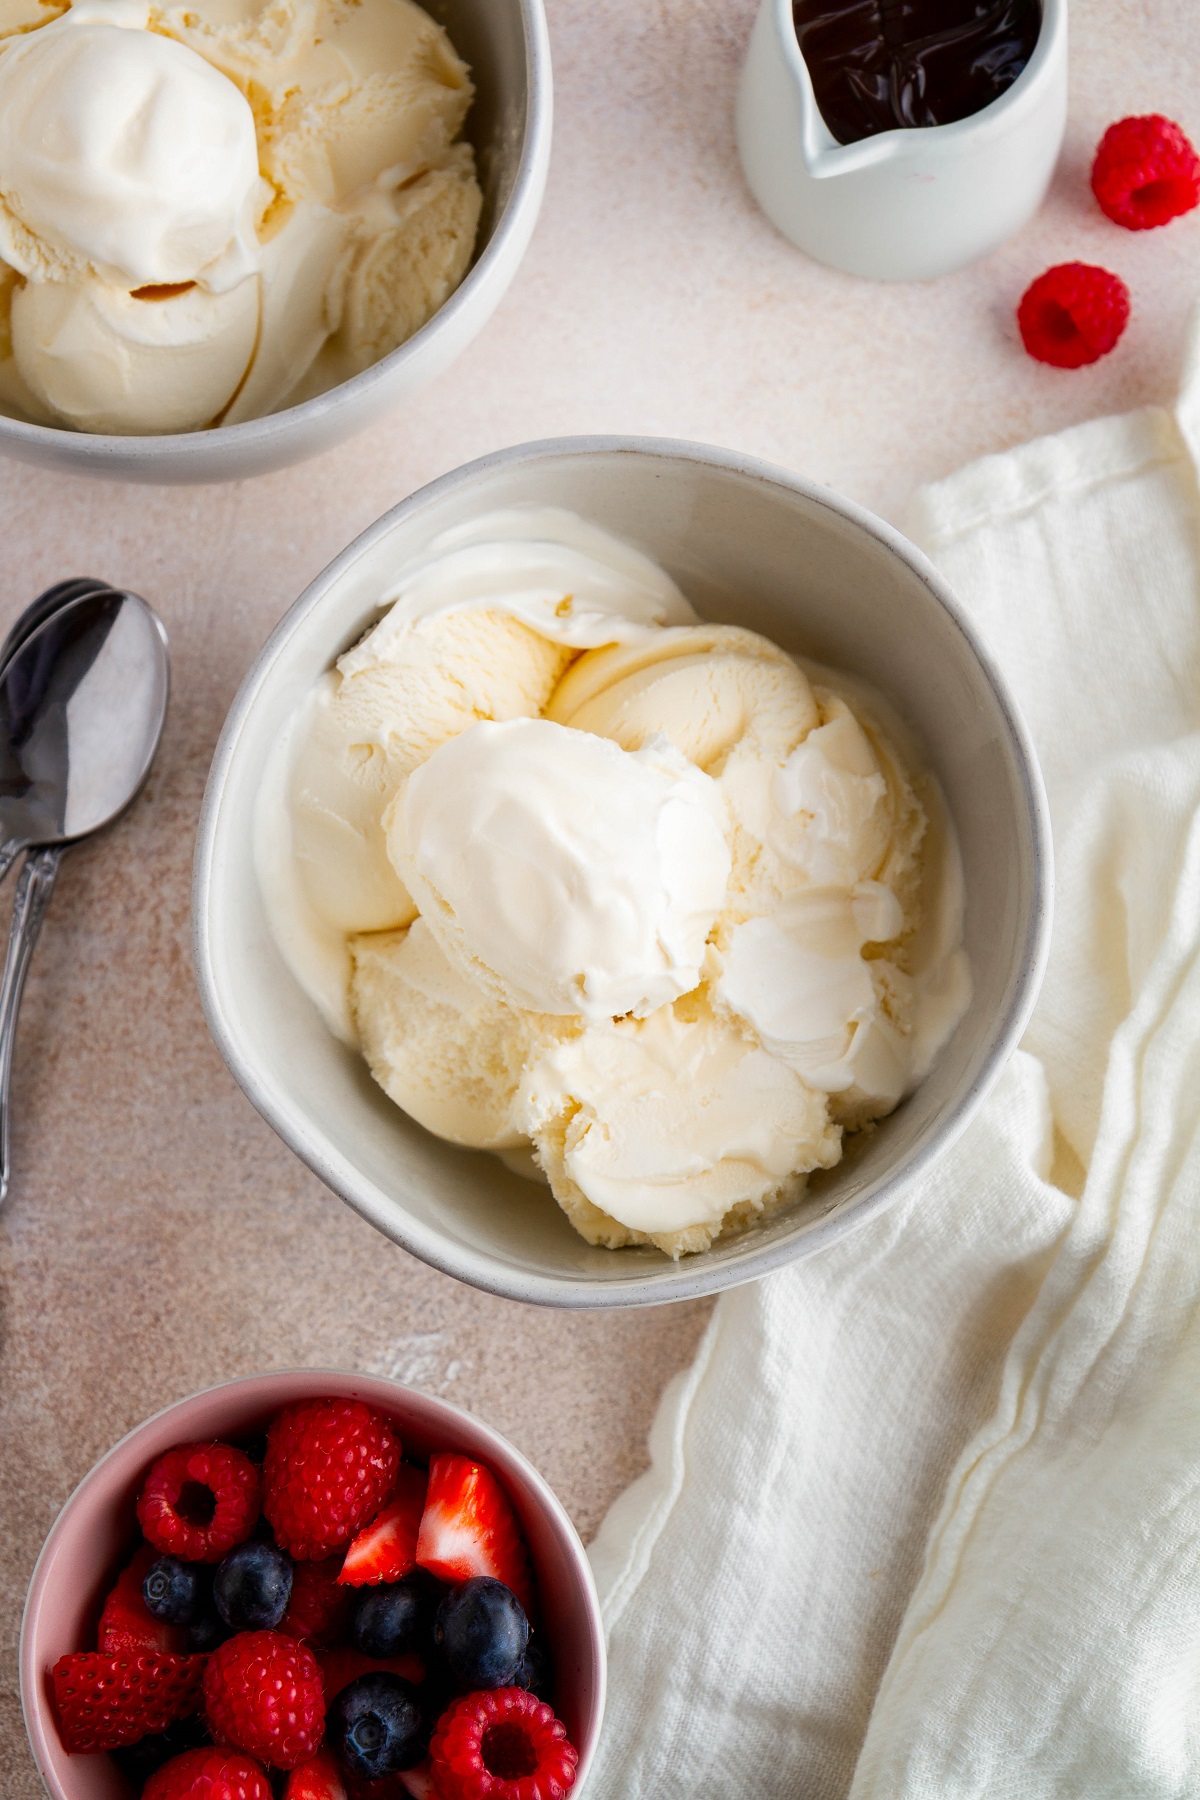 How to Make Rolled Ice Cream at Home (No Fancy Equipment Required